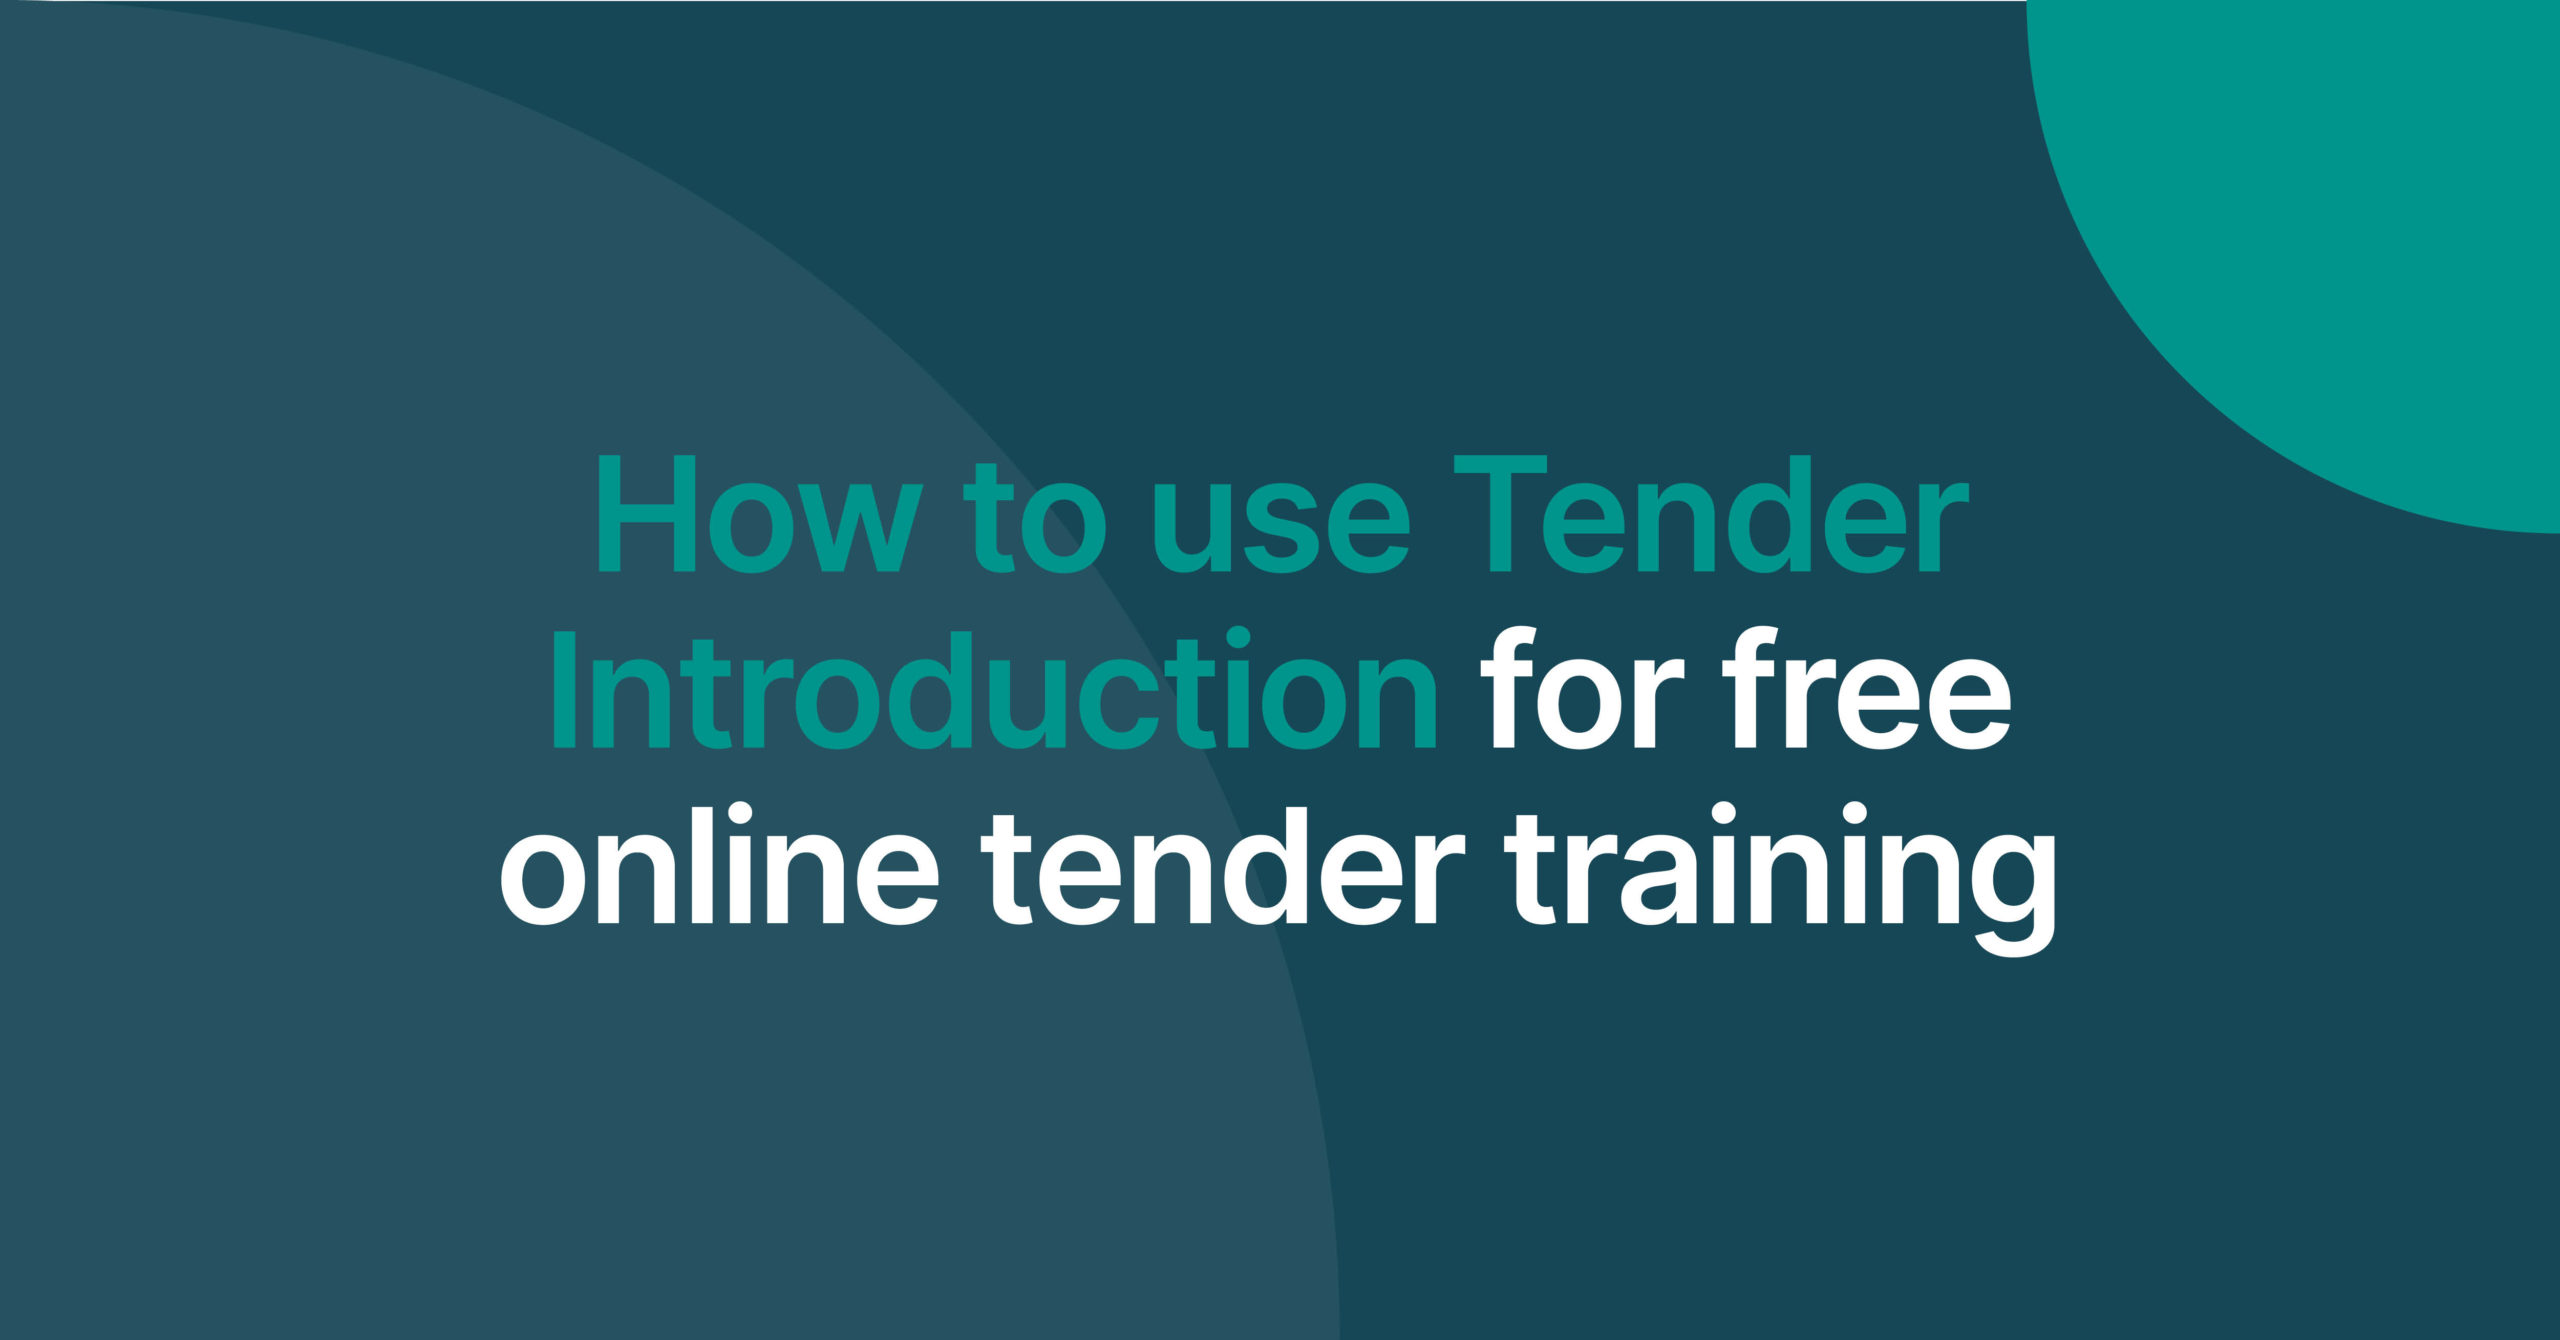 How to use Tender Introduction for free online tender training